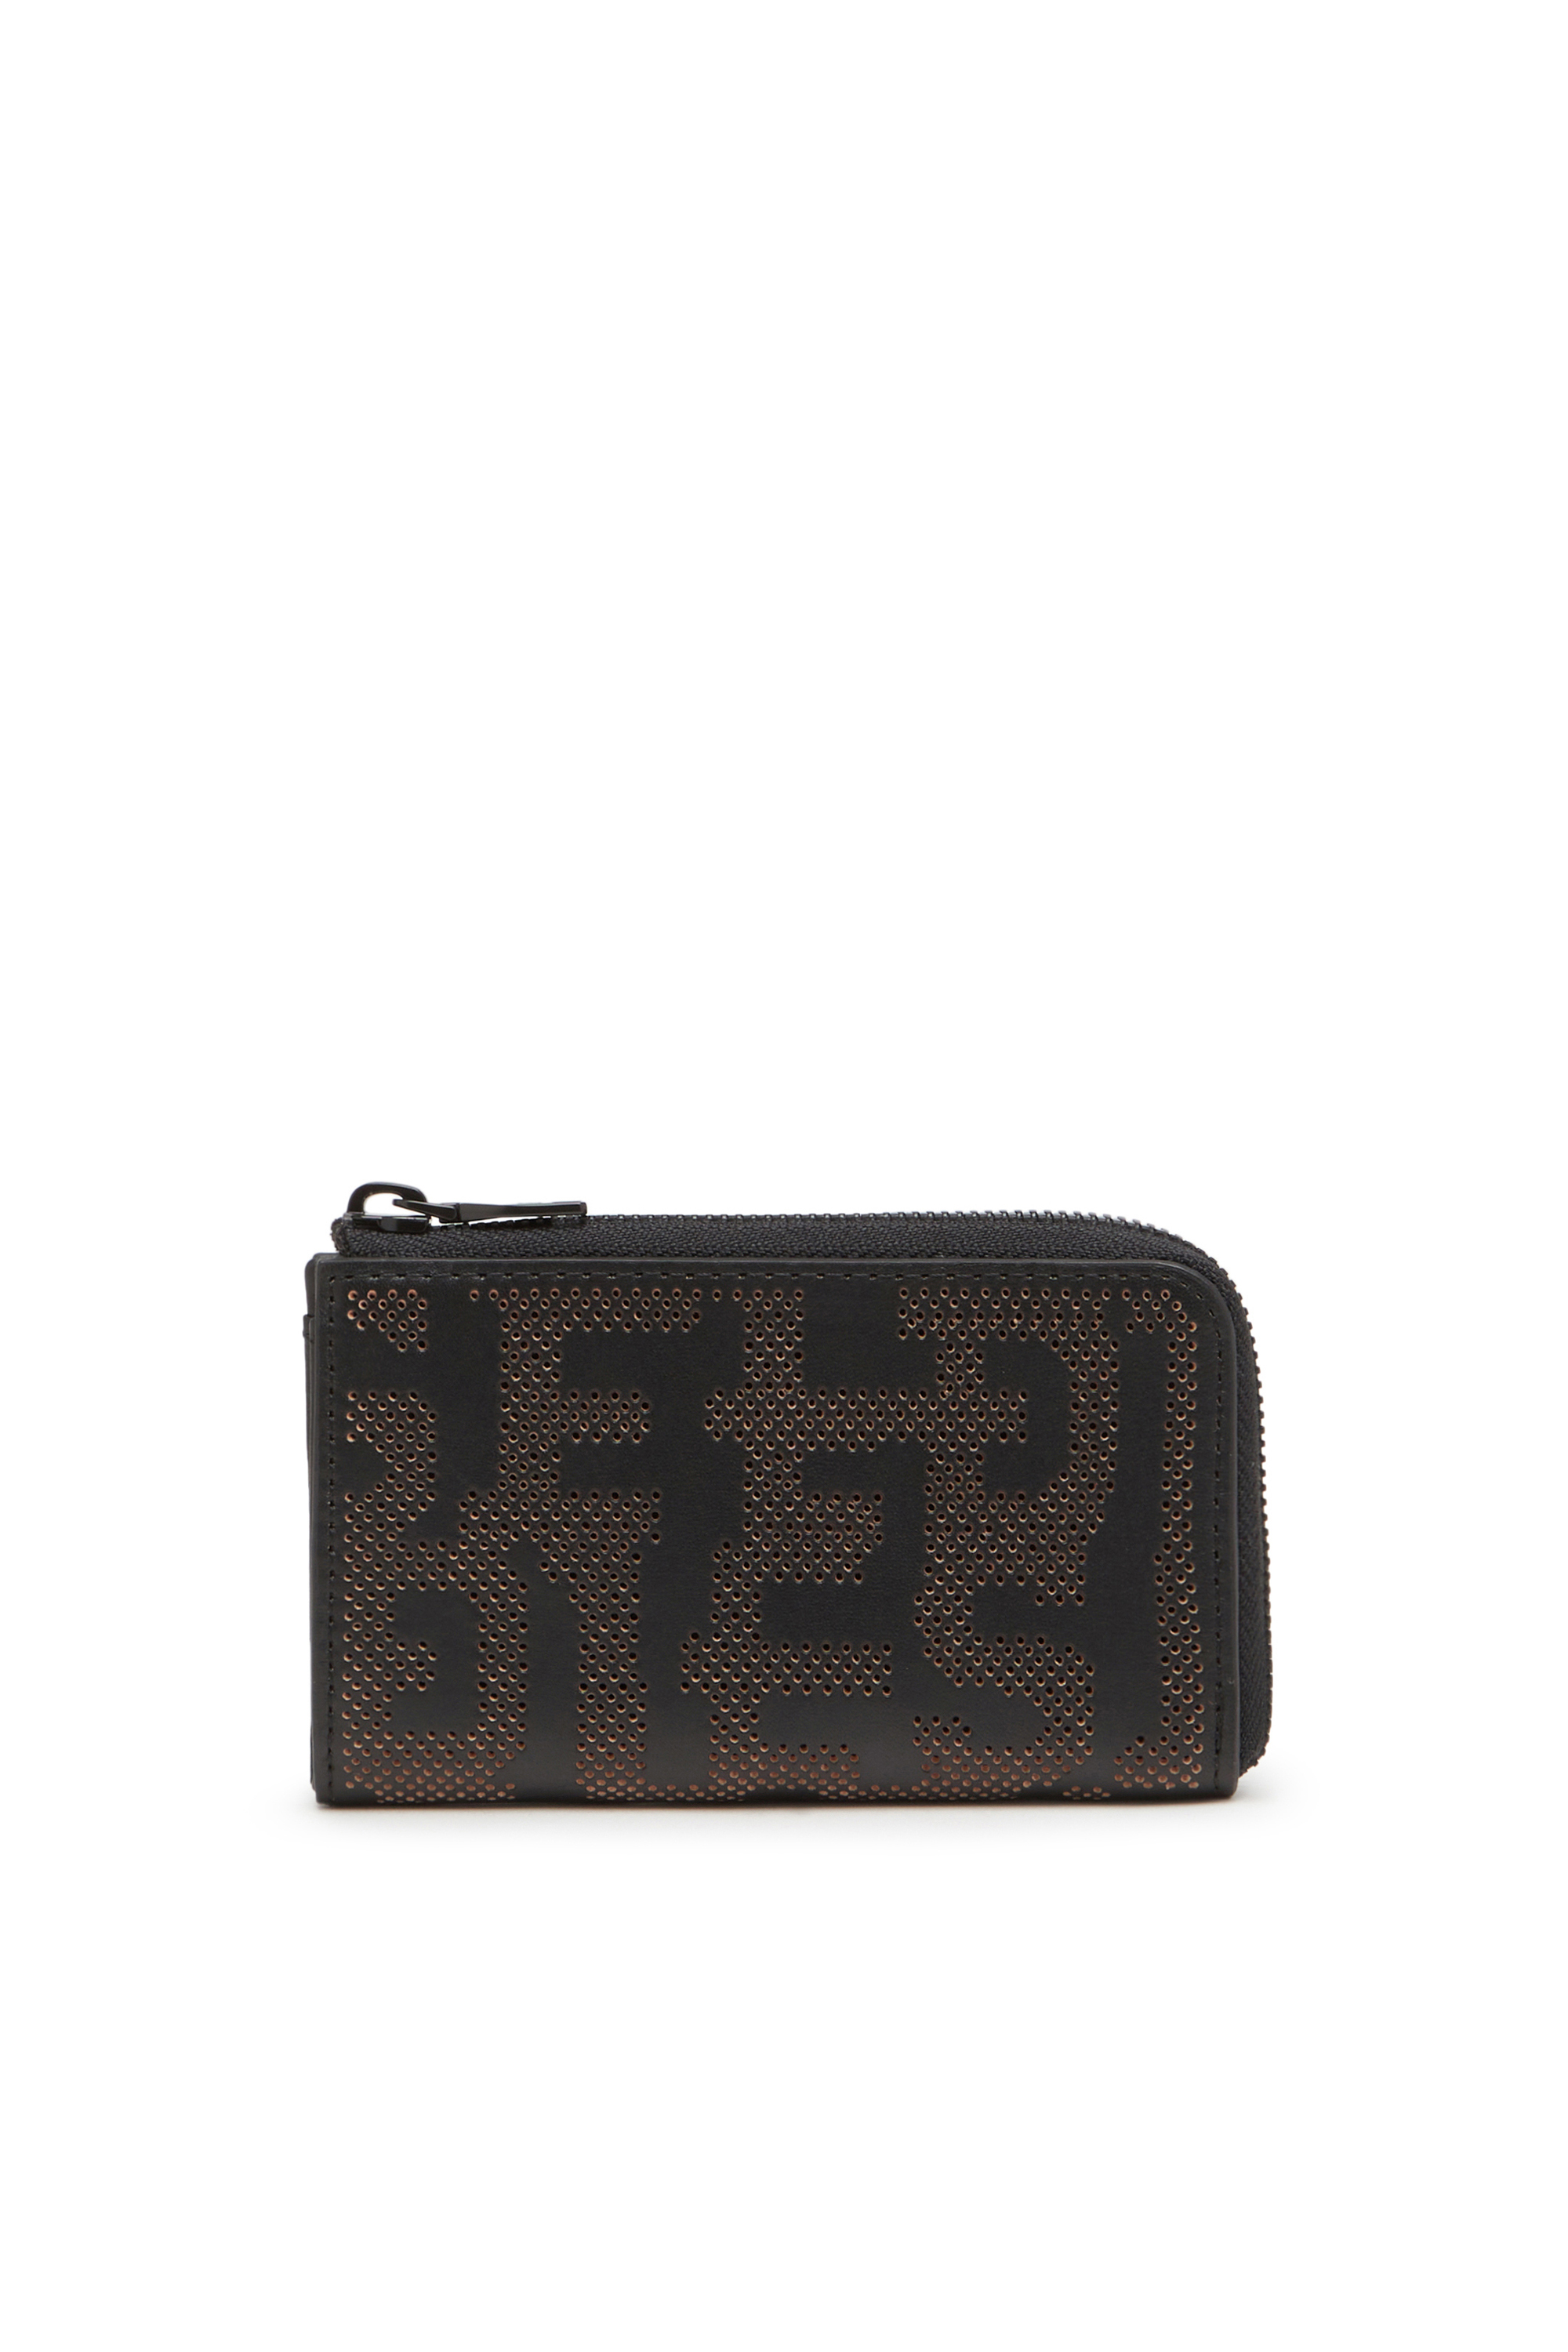 Diesel - Key holder in perforated leather - Small Wallets - Unisex - Black